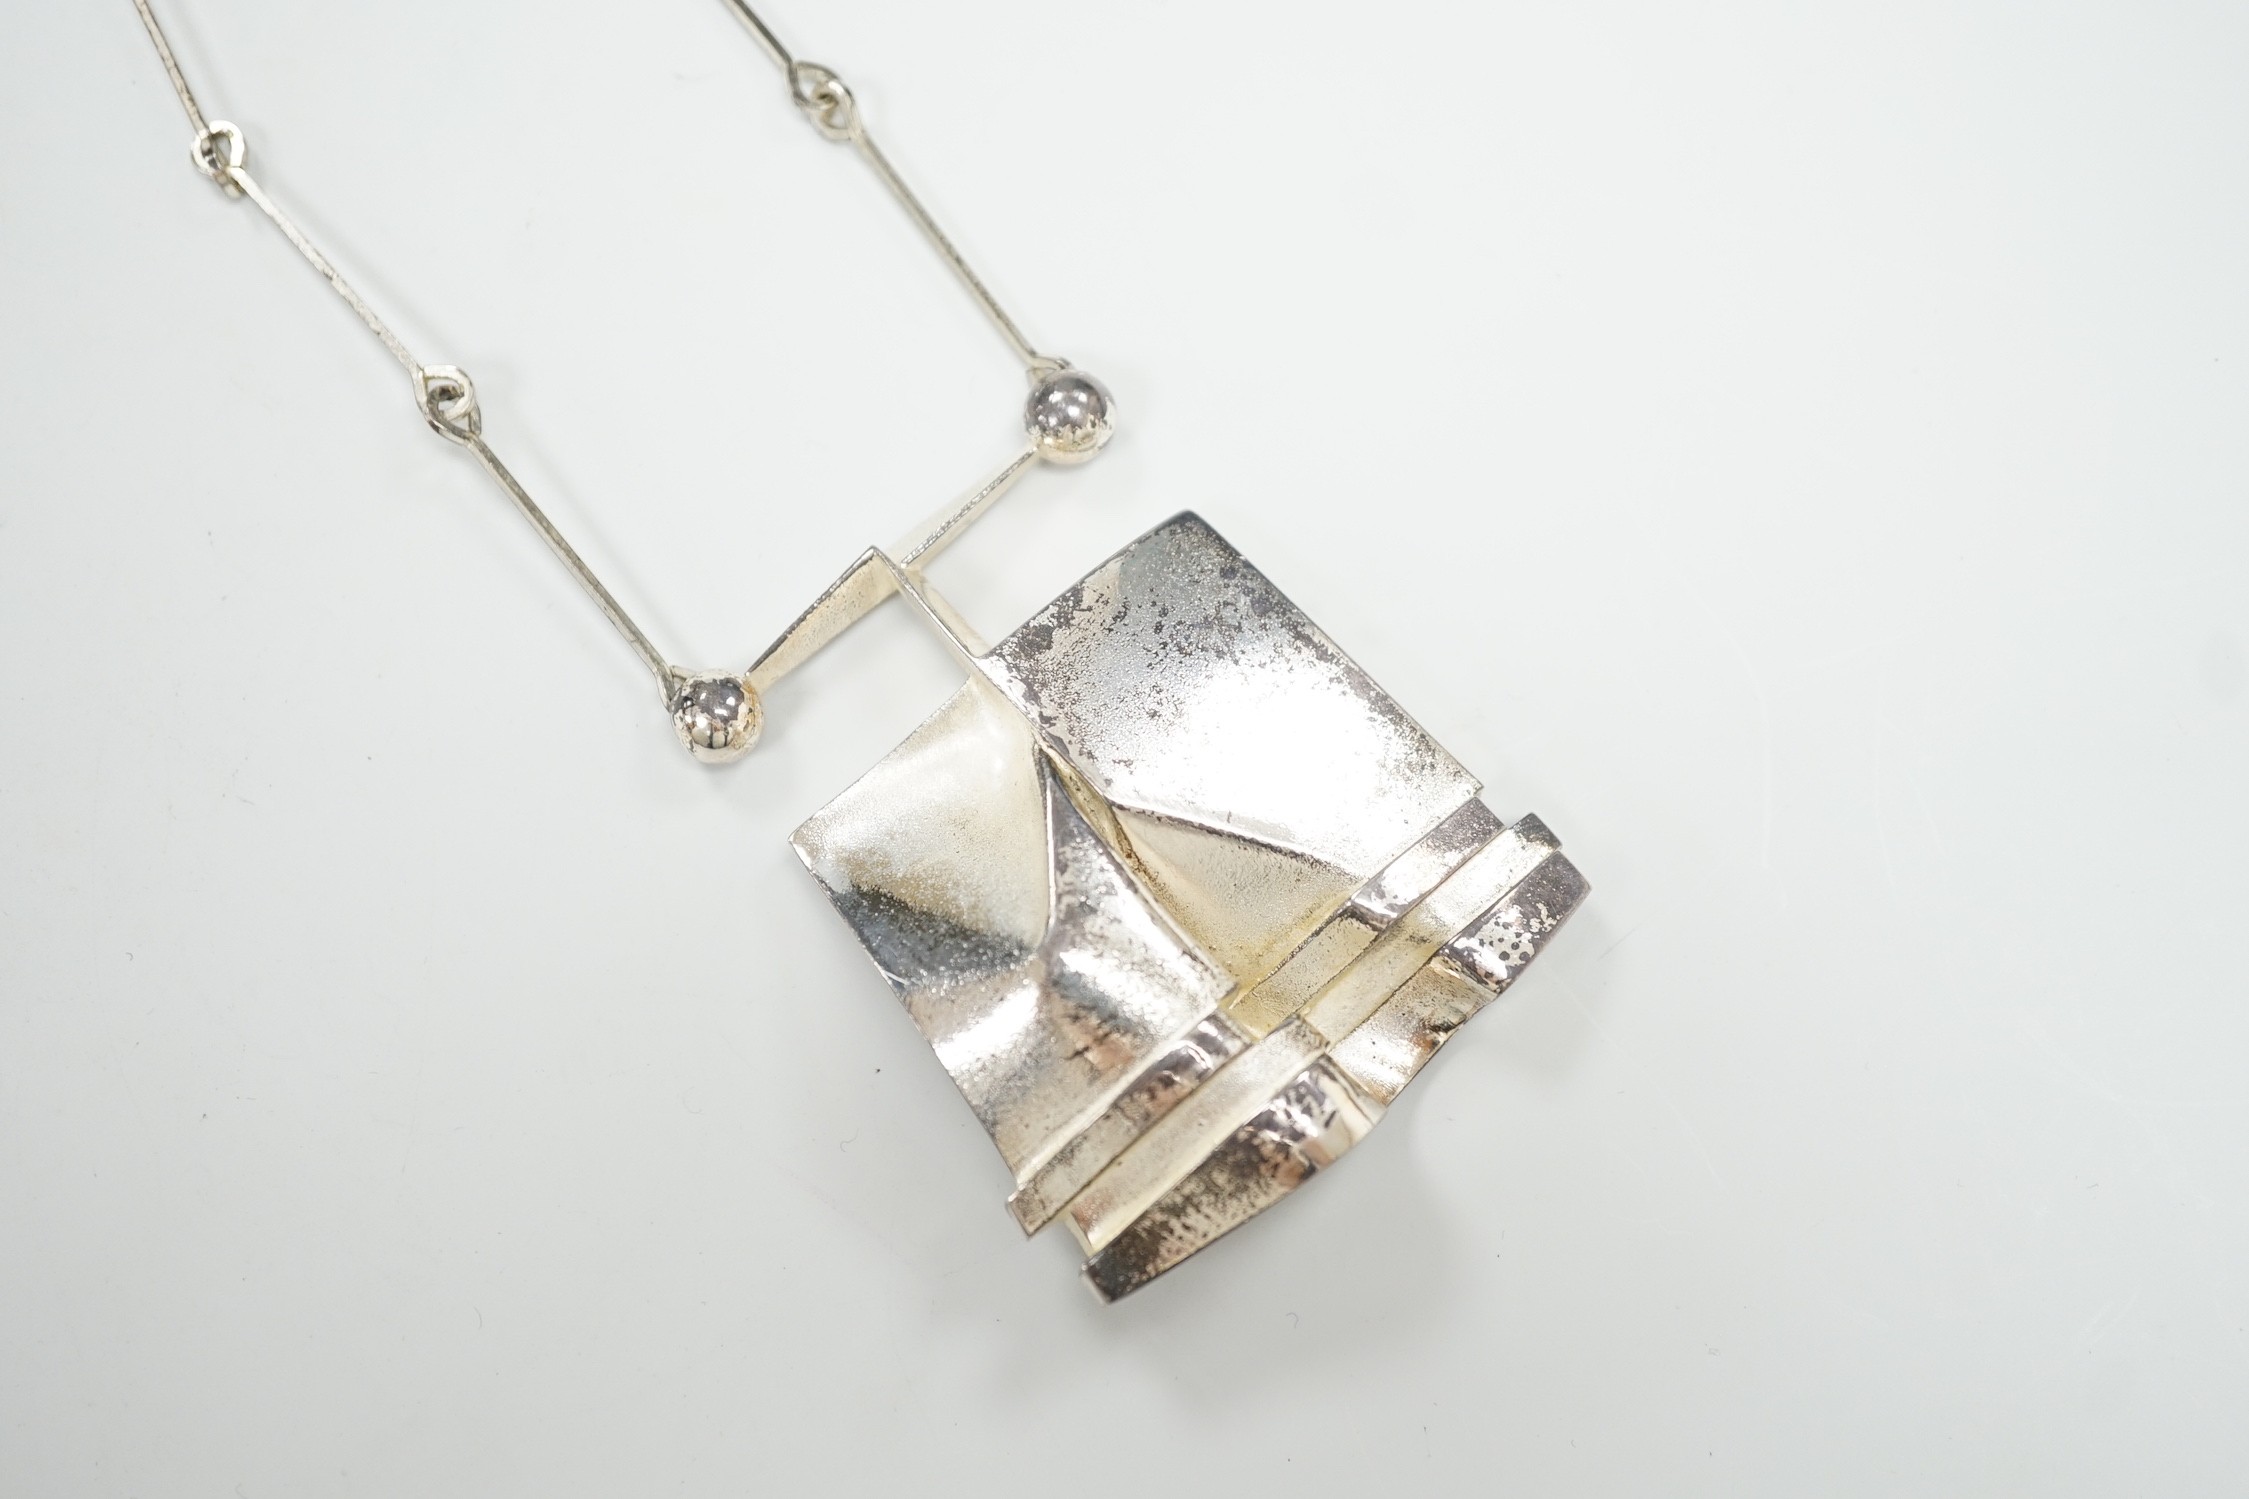 A modern Finnish sterling abstract pendant necklace, 84cm, 52 grams.